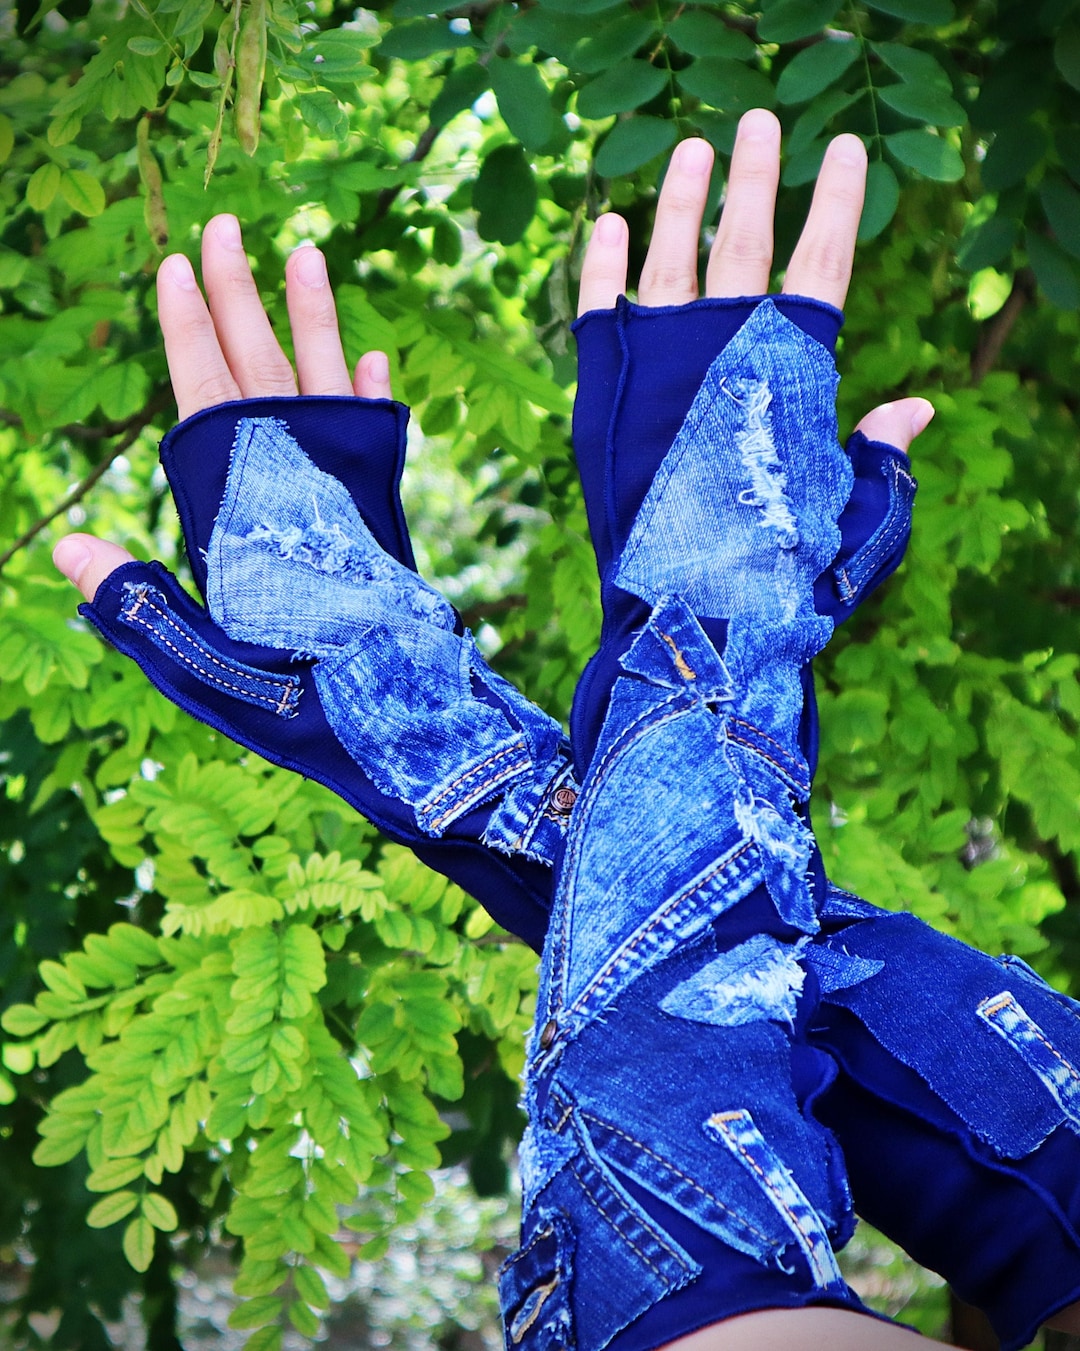 Denim Fingerless Gloves With Pathces, Long Jean Arm Warmers, Cotton Fingerless  Gloves -  Canada